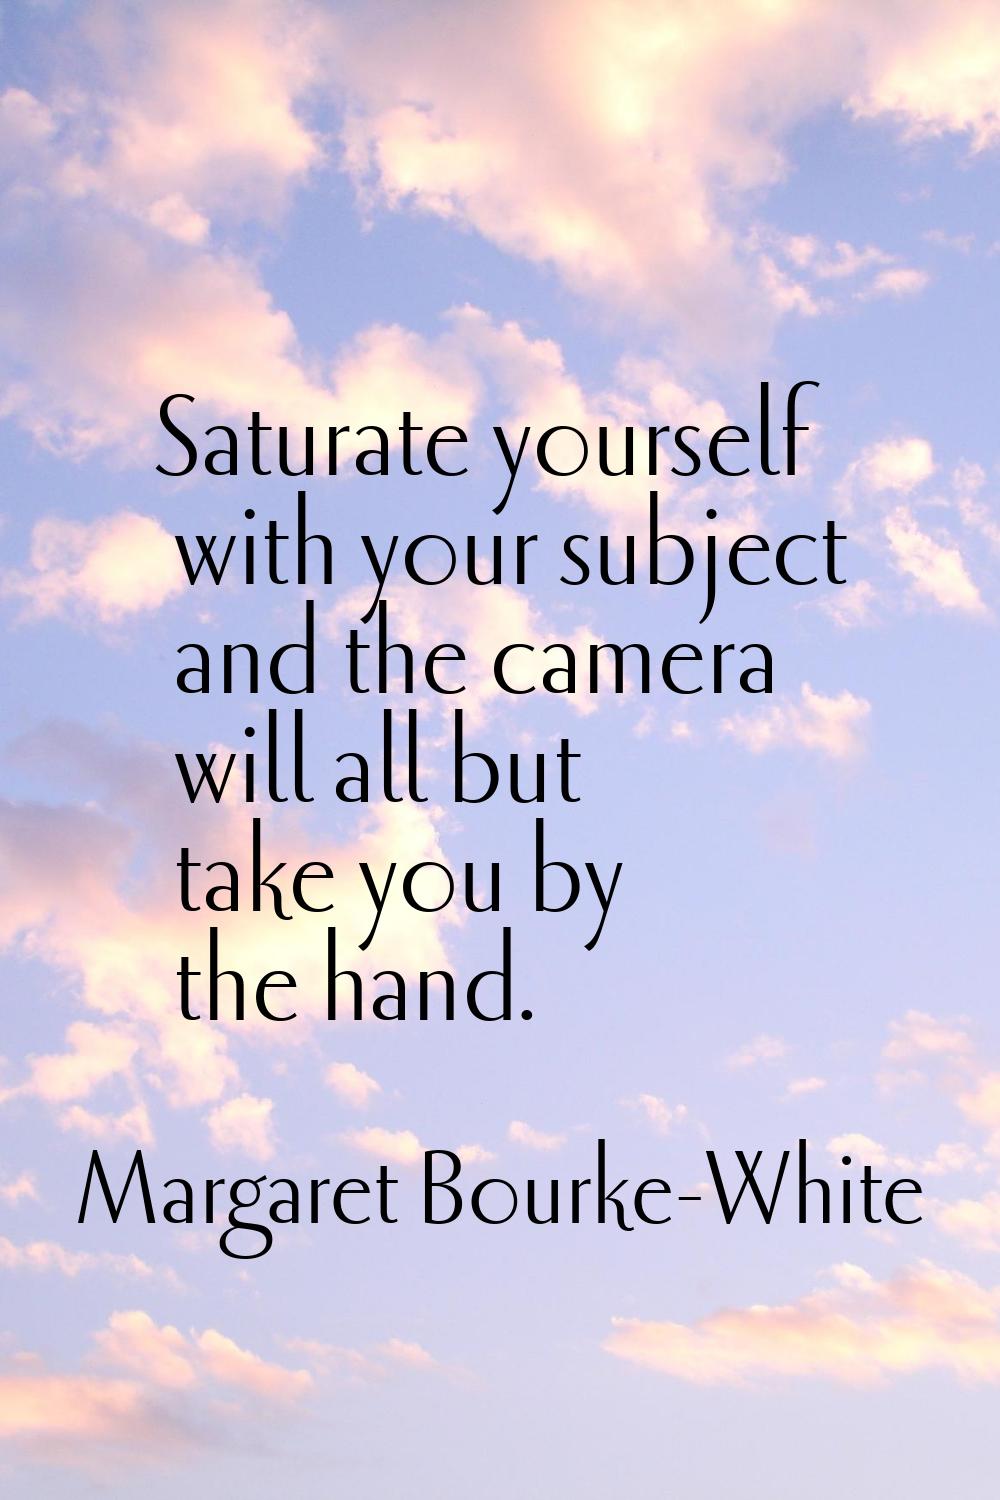 Saturate yourself with your subject and the camera will all but take you by the hand.